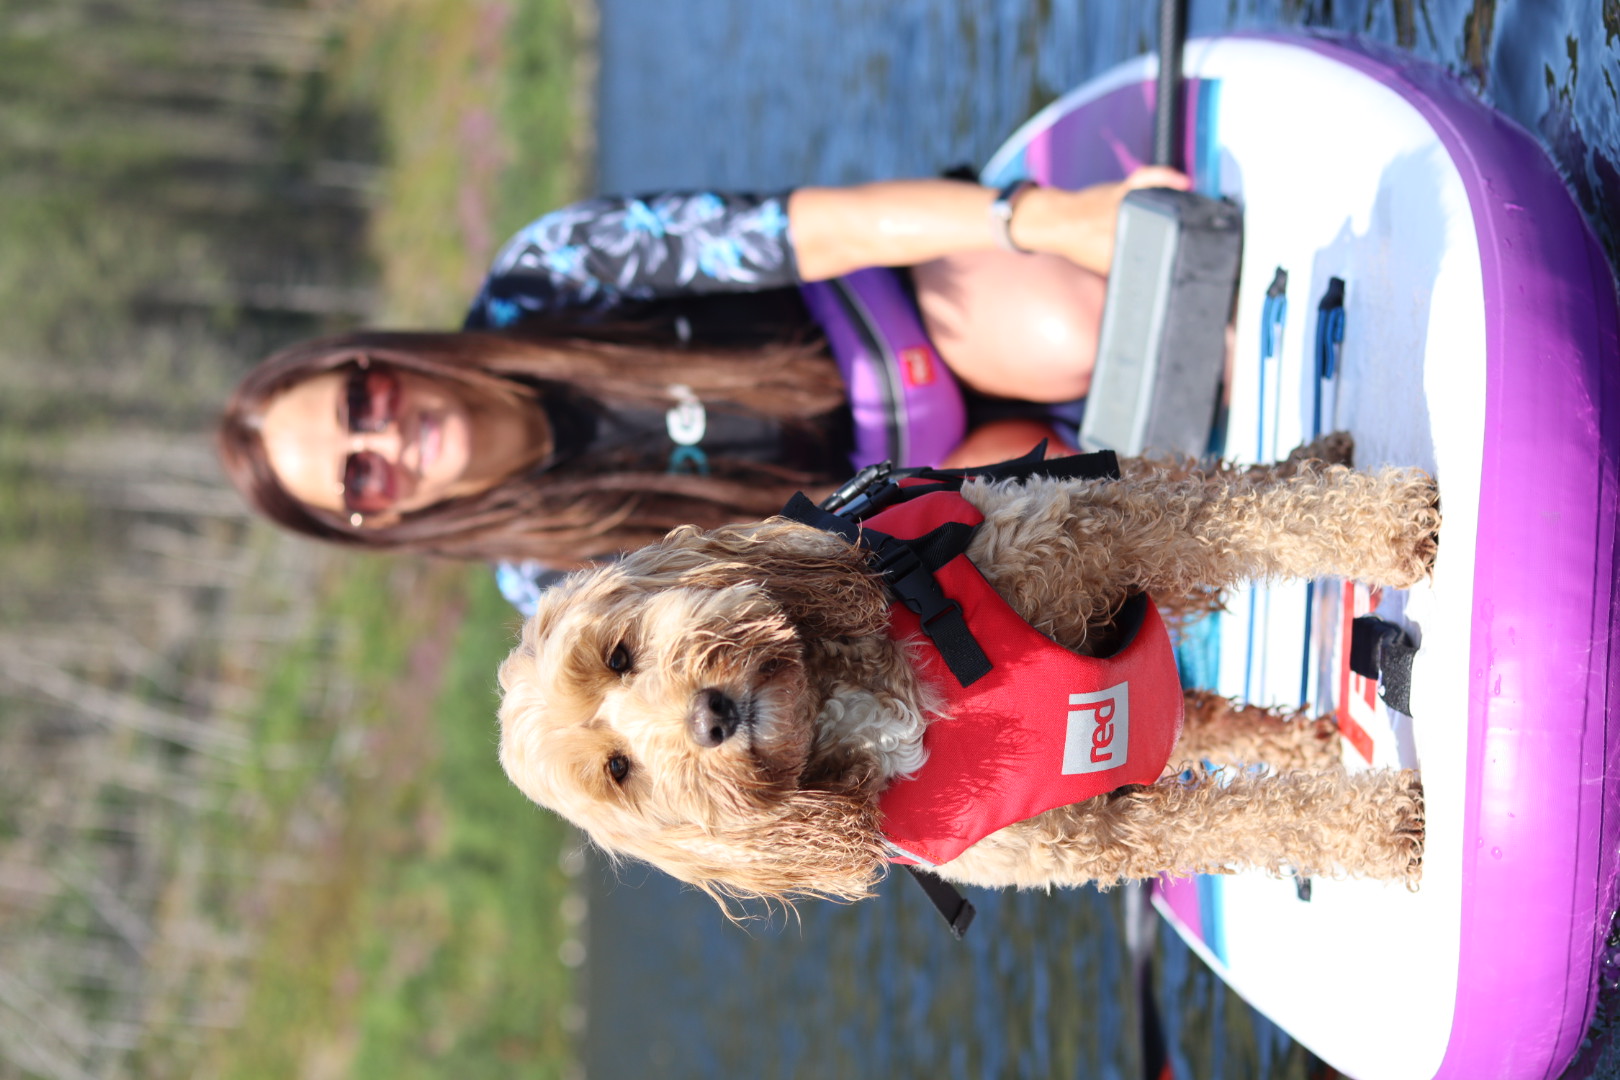 Reggie the Cockapoo paddleboarding with his owner